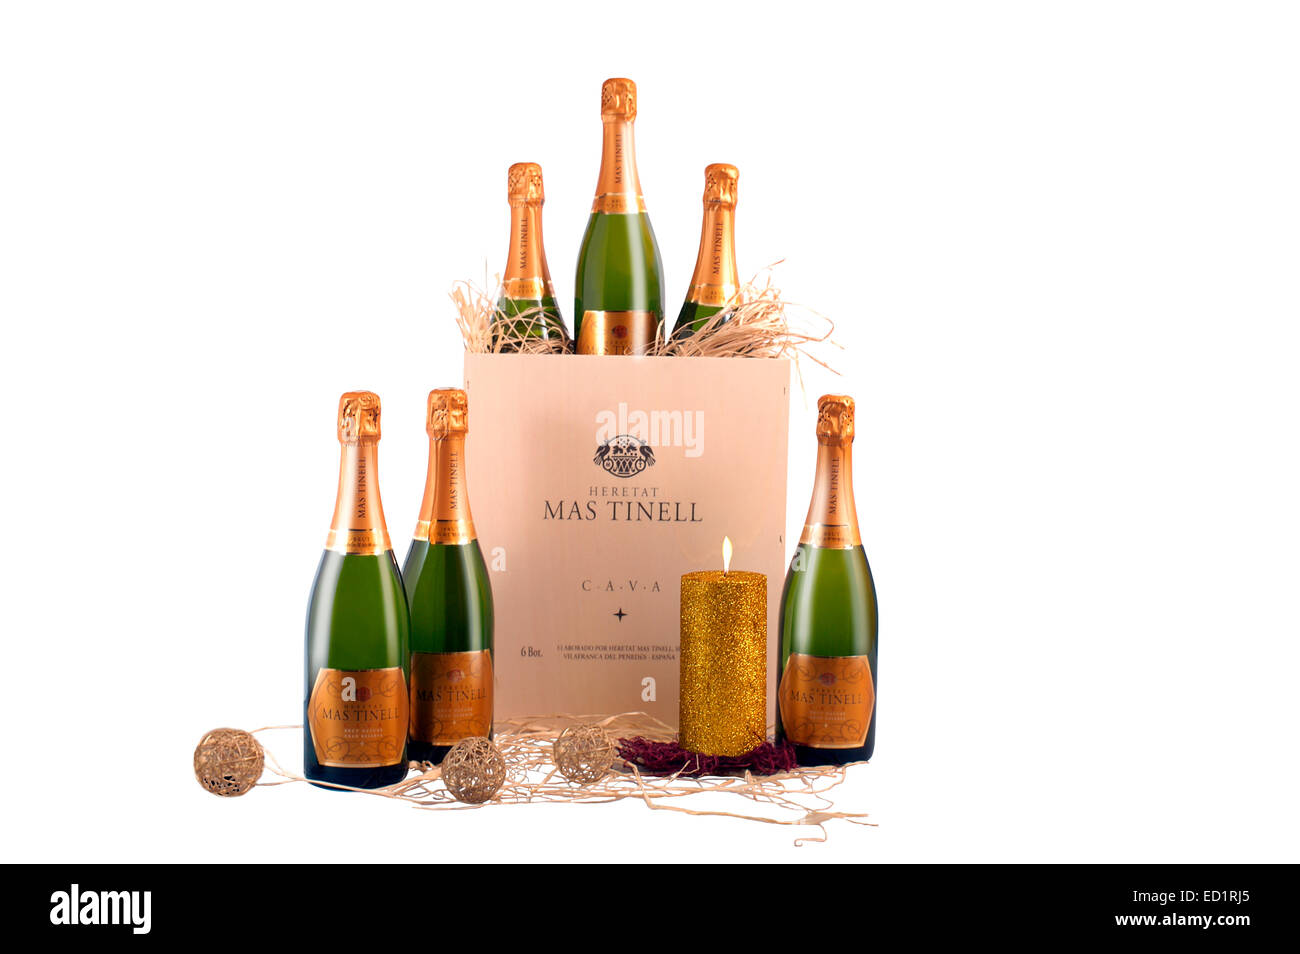 Spanish Bottle of Cava Sparkling wine. Catalonia cava mastinell. Founded in 1989, this company produces 300 bottles of Cava spar Stock Photo